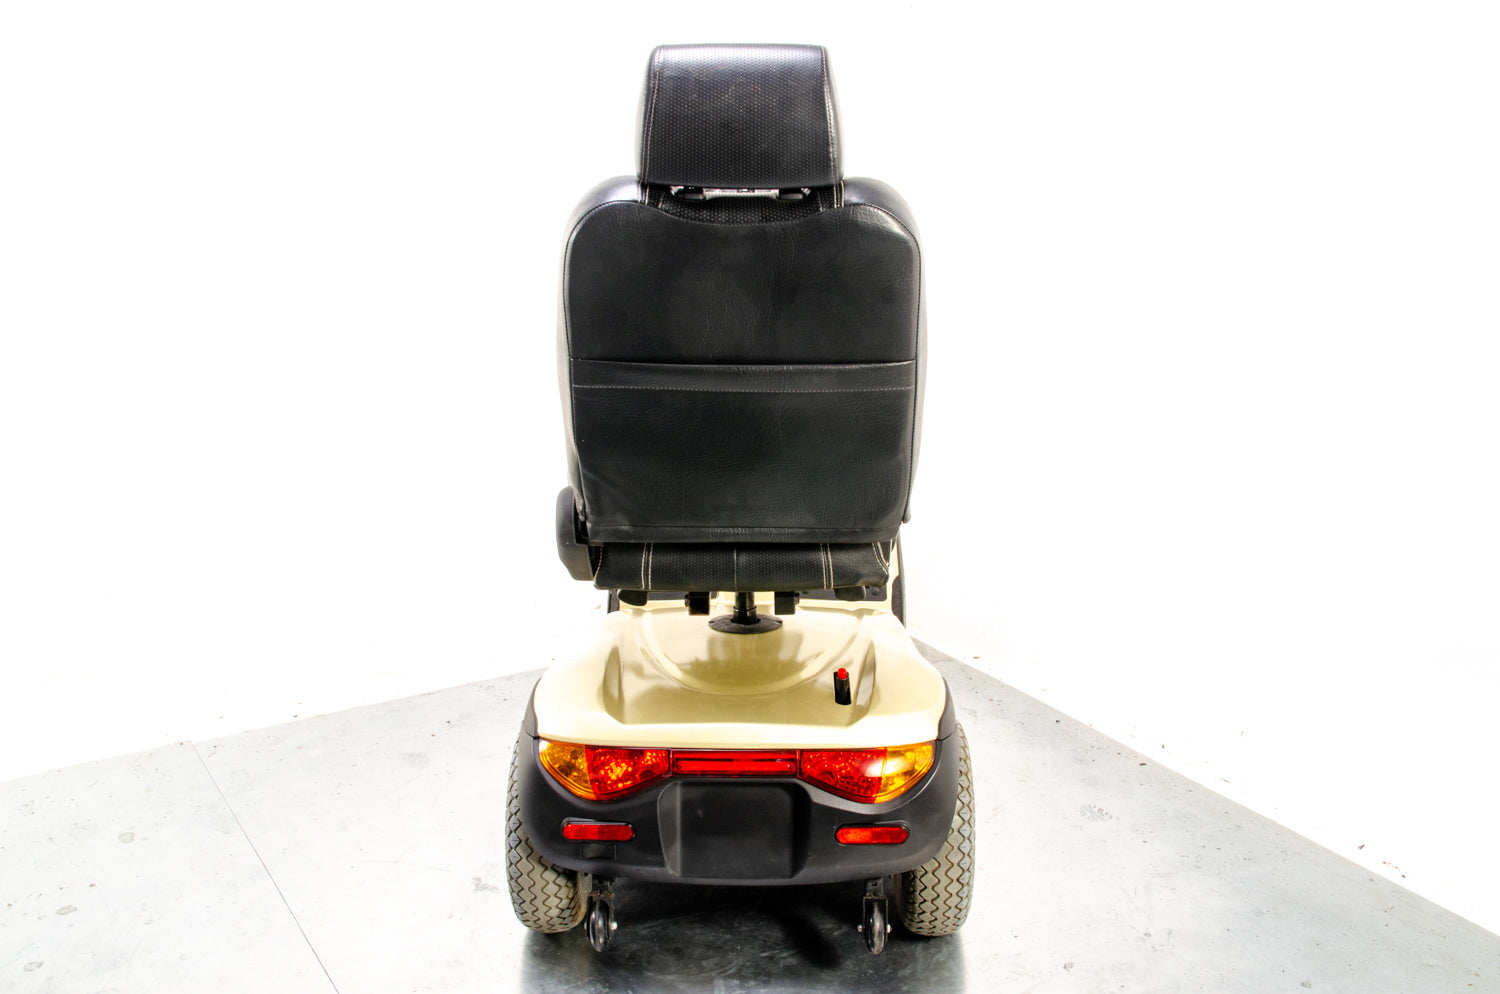 Invacare Comet Used Mobility Scooter 8mph Large All-Terrain Off-Road Comfort Gold